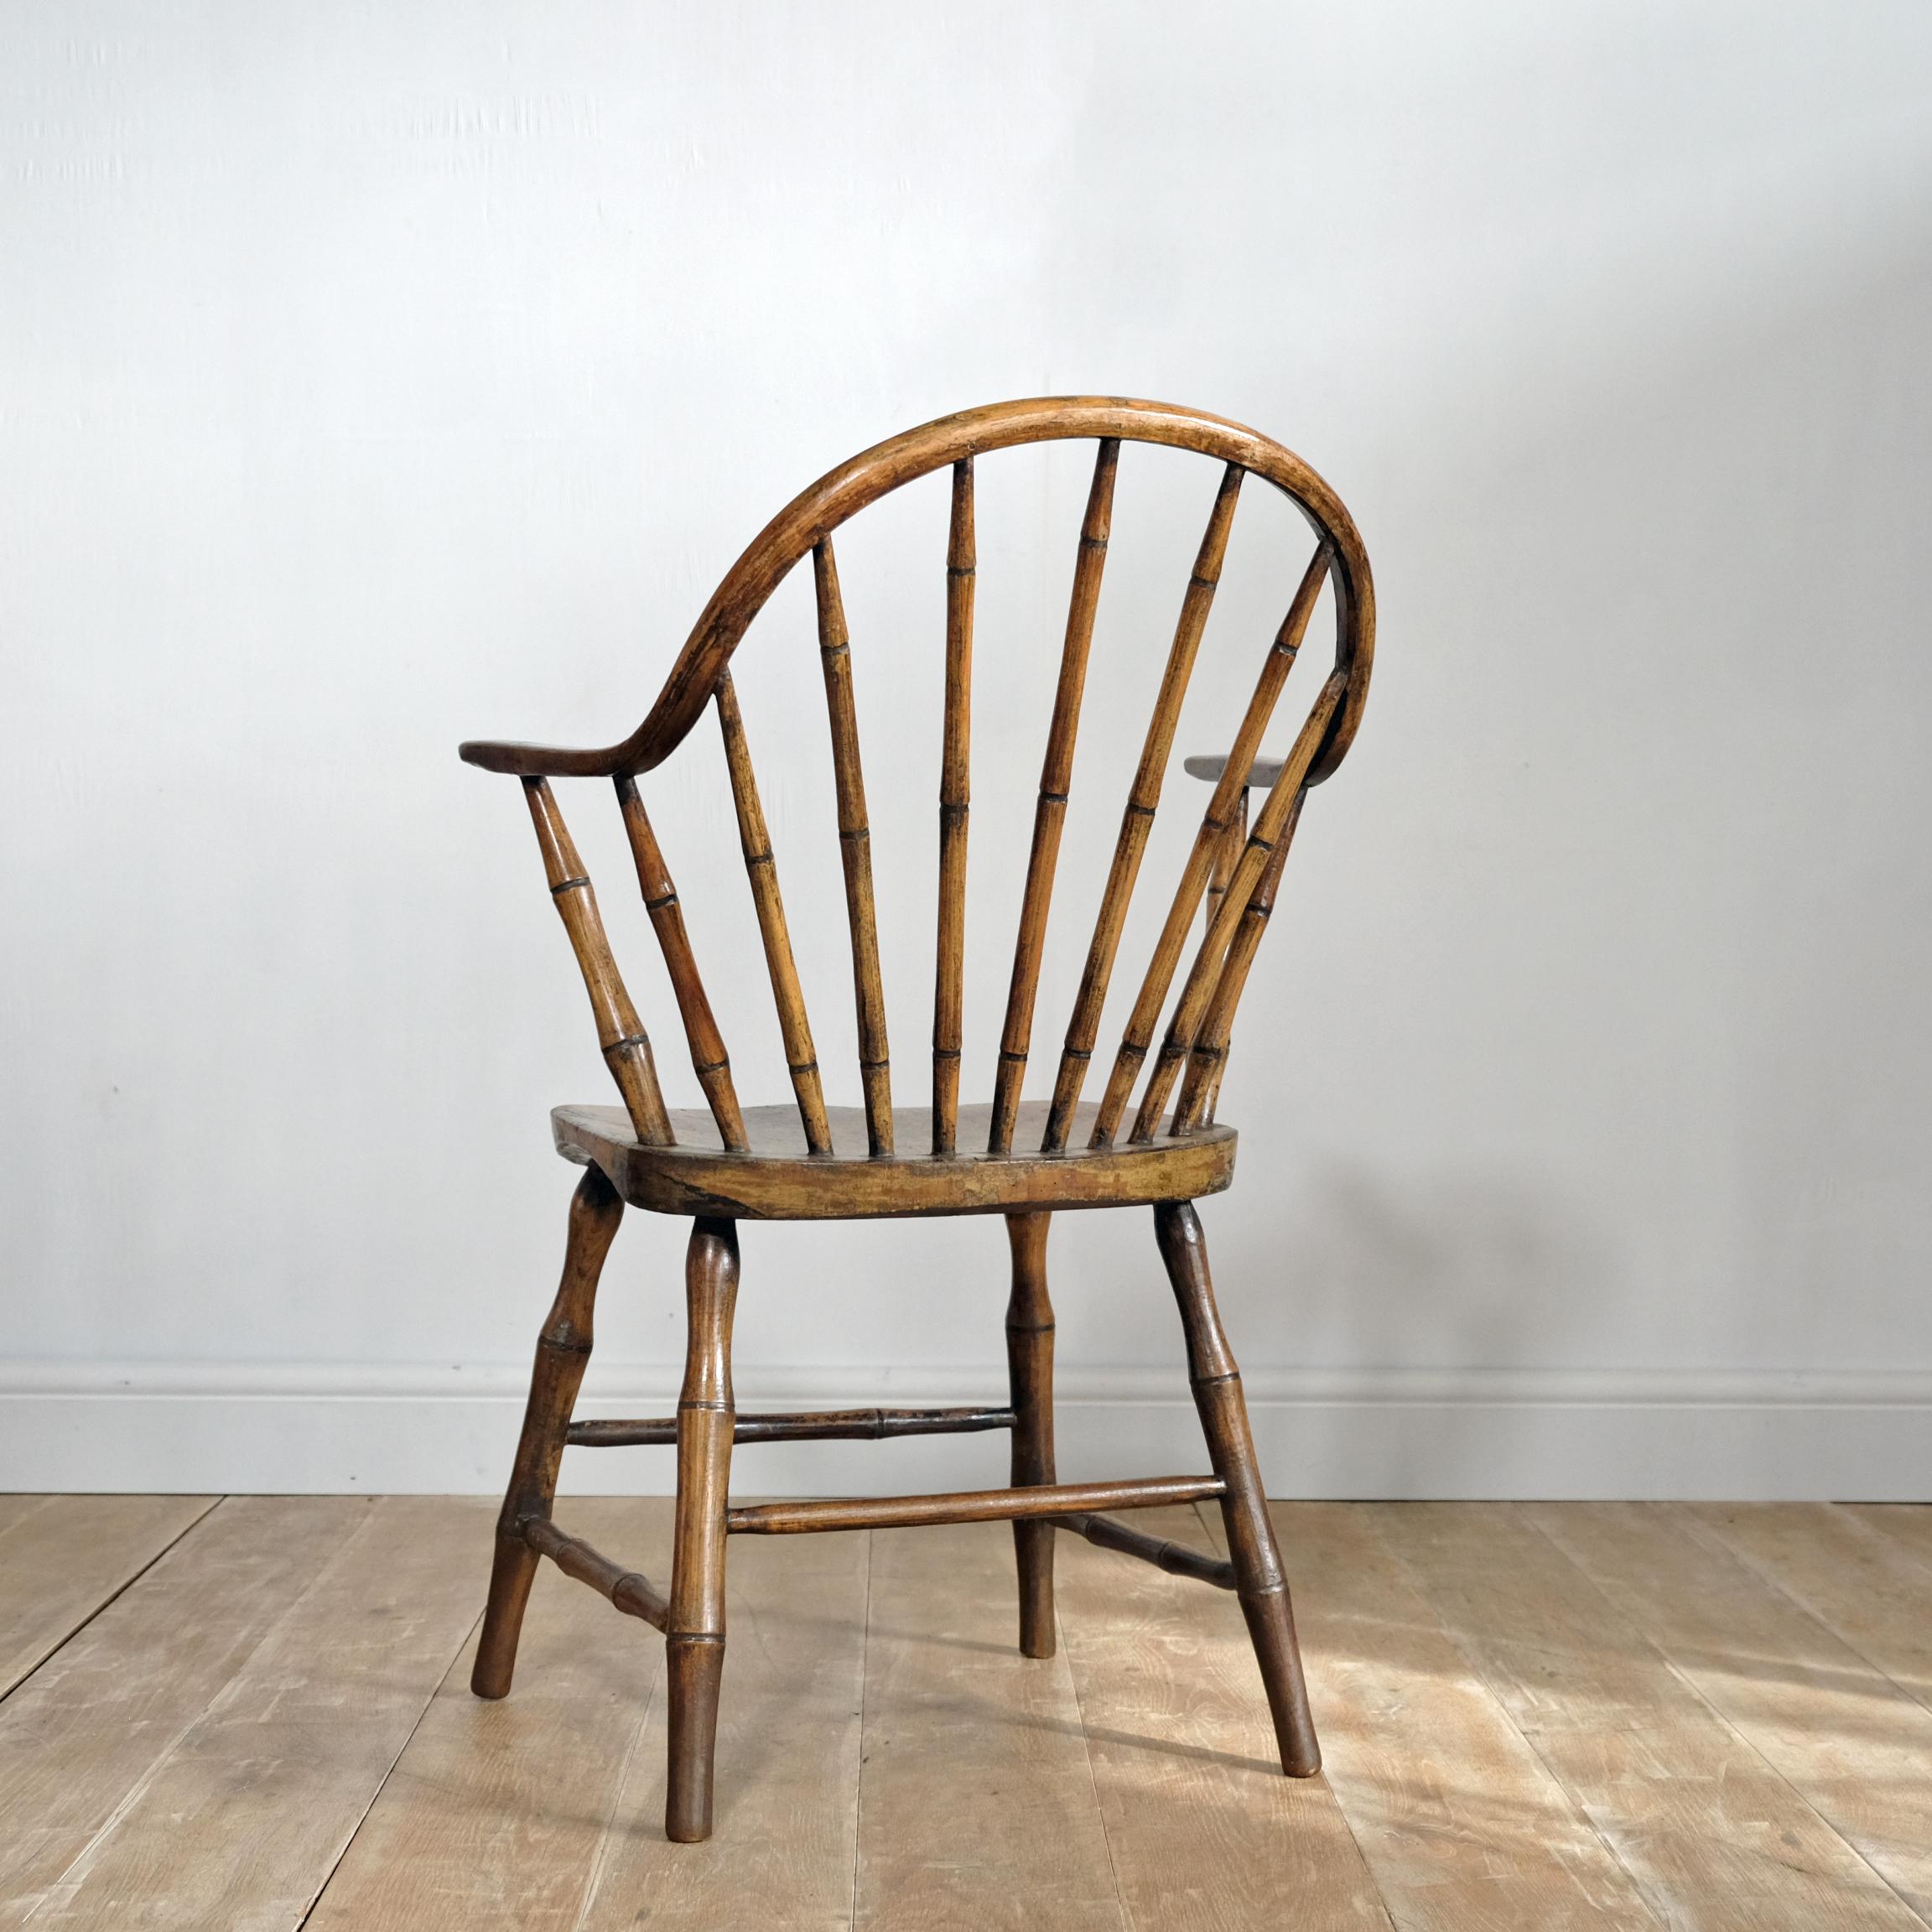 Hand-Carved Continuous Arm Yealmpton Windsor Chair, English, Armchair, Original Paint, 1820s